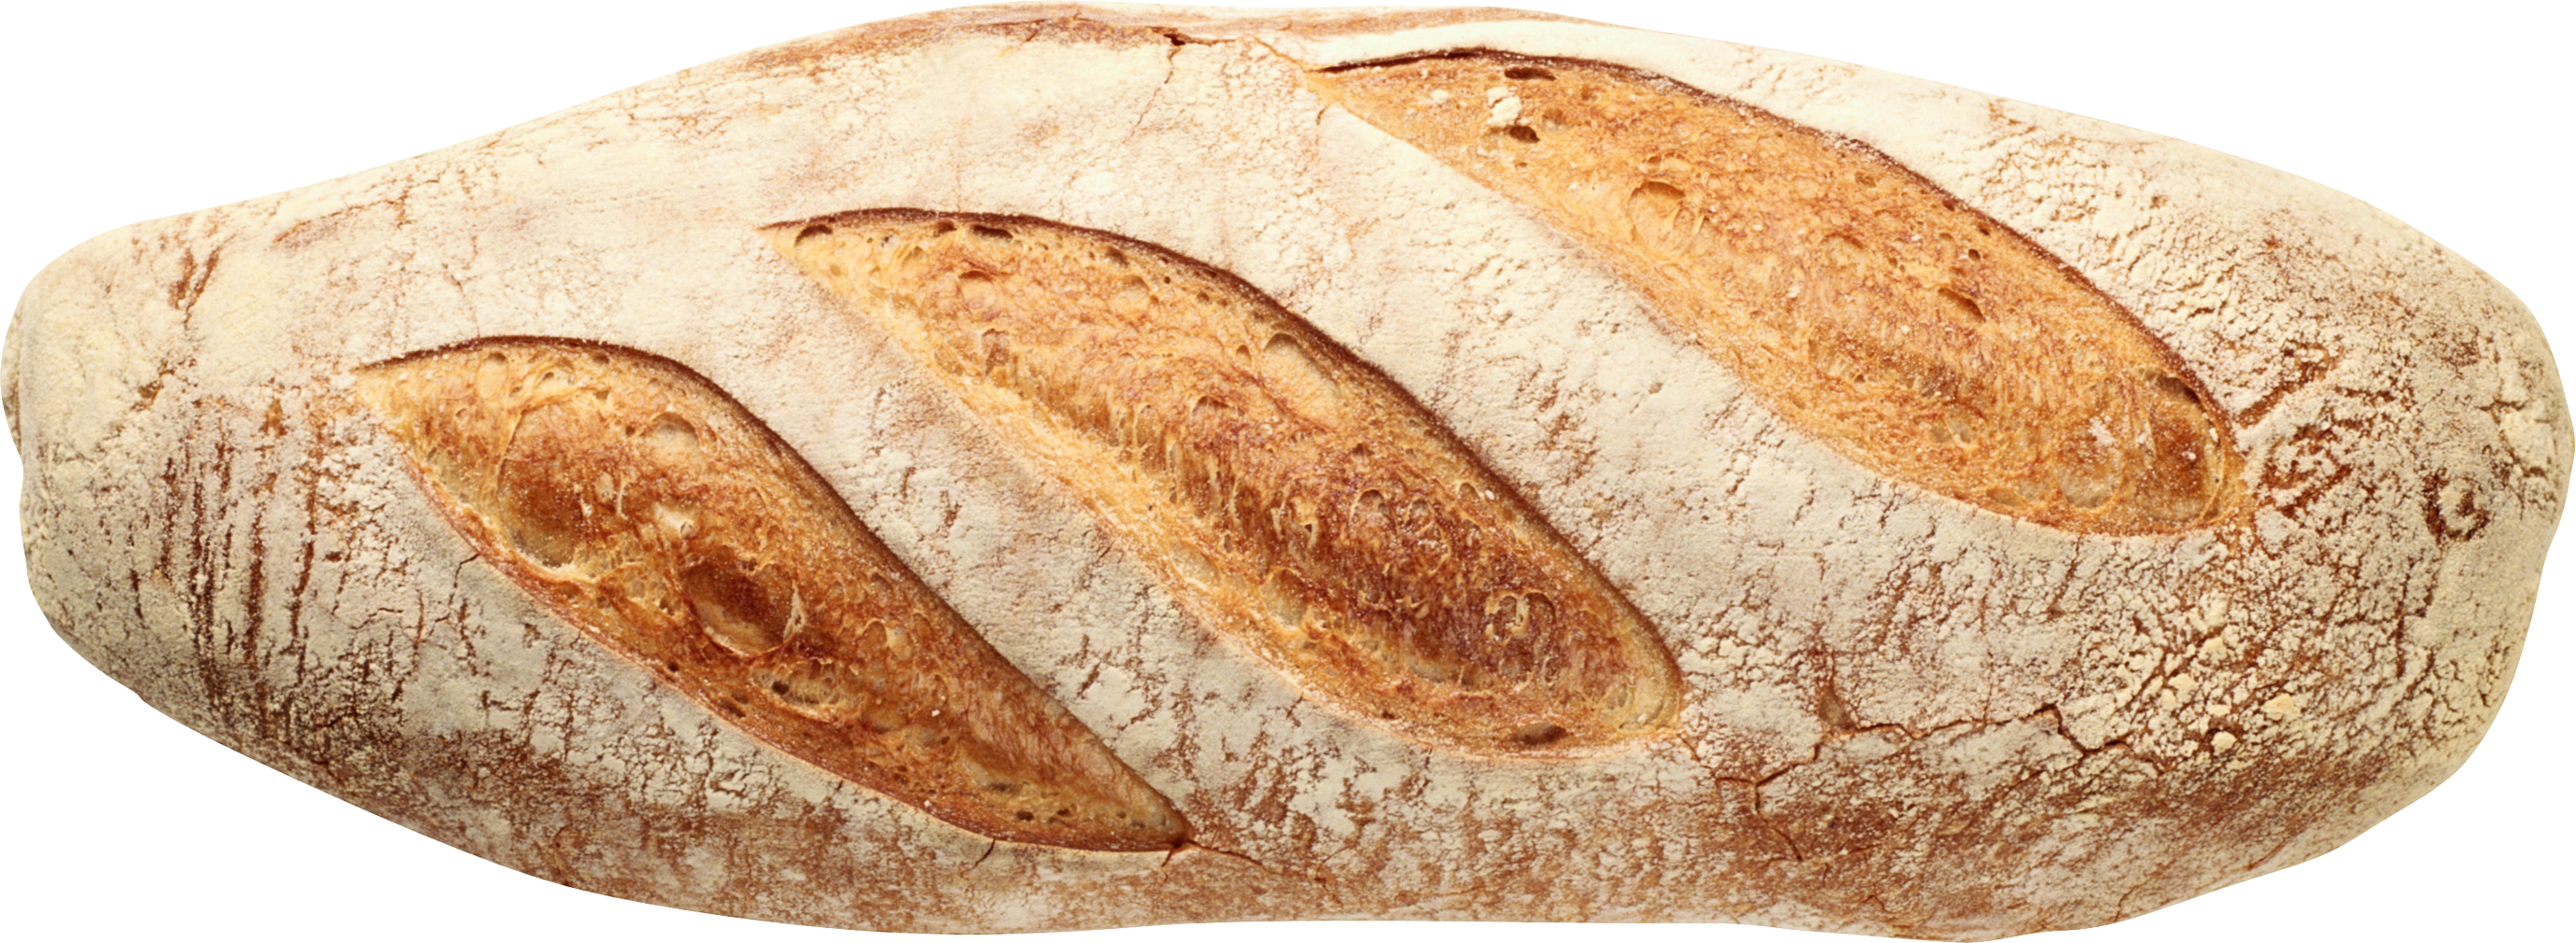 Bread Png Image Bread Png